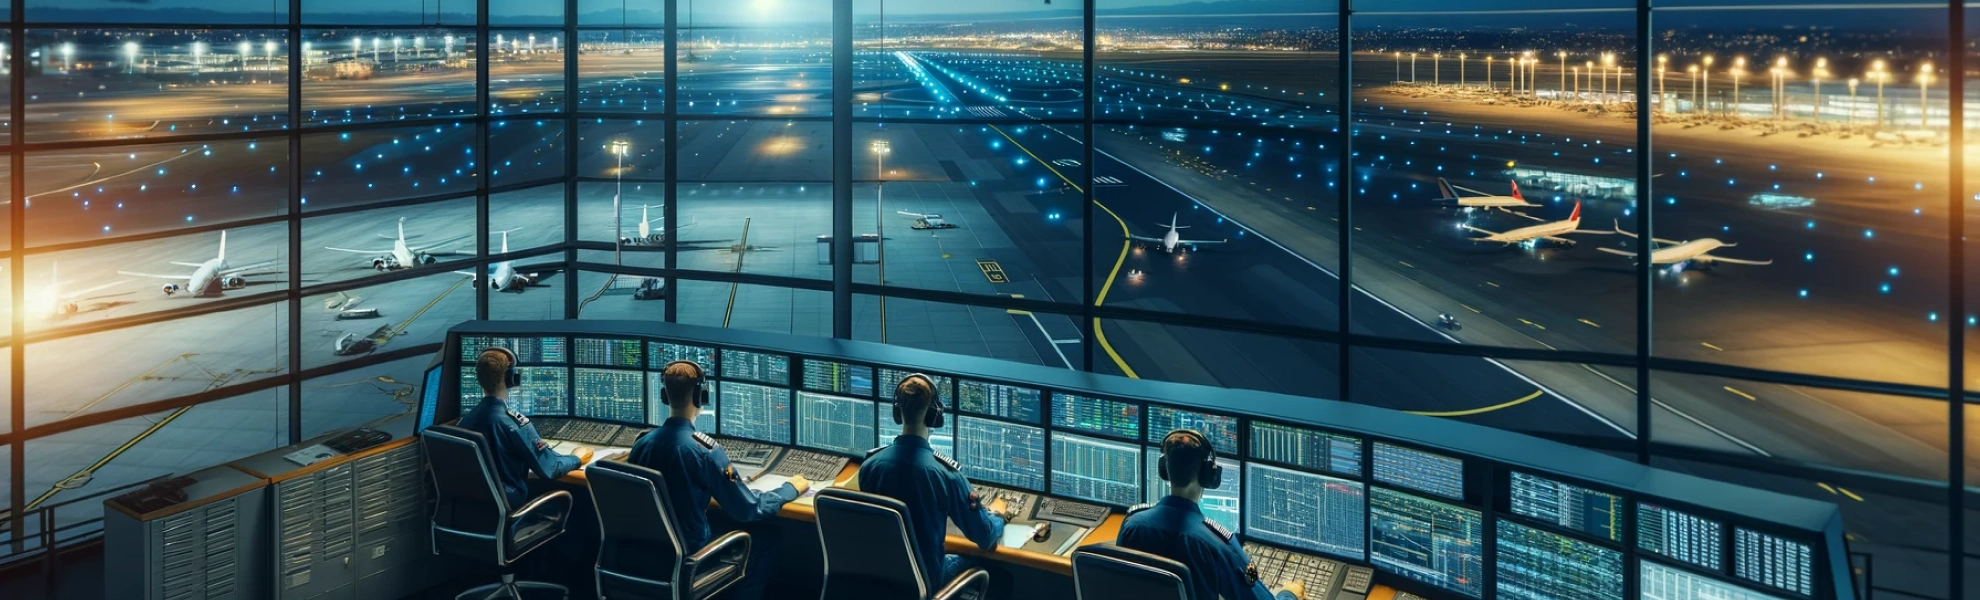 A Guide to Creating Operations Management Software for Airports (AOCC)